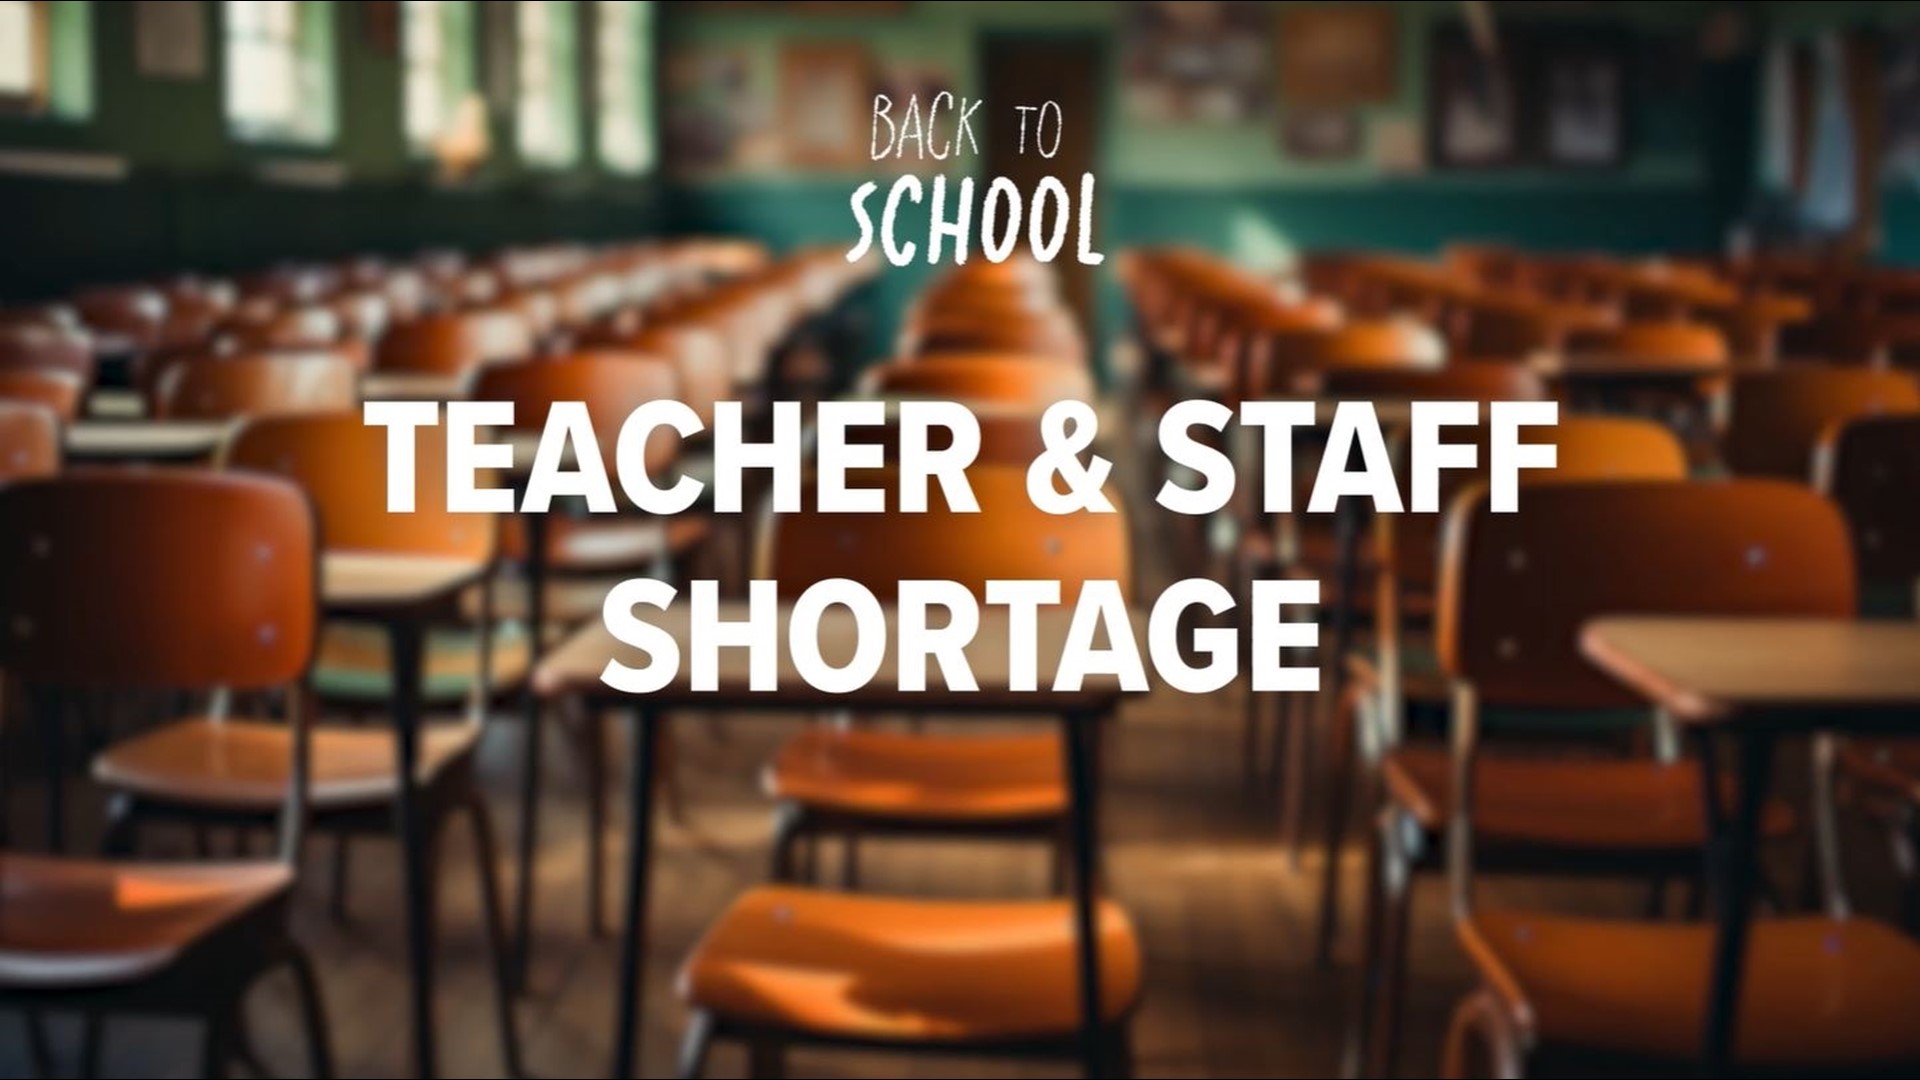 Schools across the U.S. are still dealing with teacher and staff shortages. A look at the incentives and plans districts are using to retain staff.